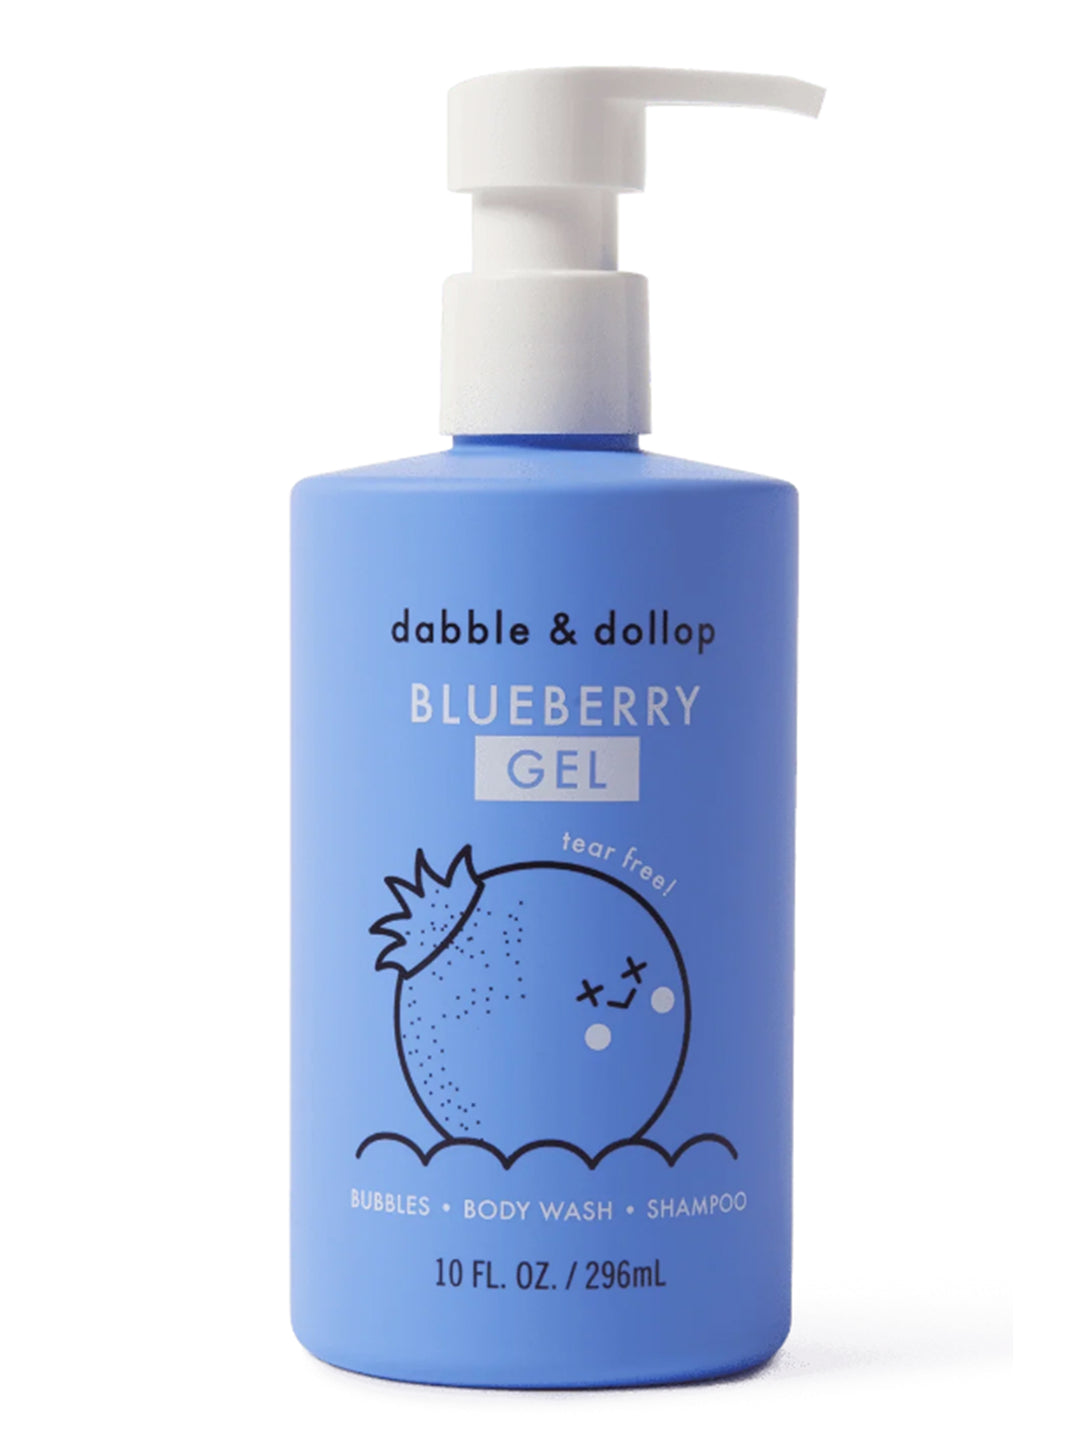 Dabble & Dollop Blueberry Gel - Bubbles, Body Wash, and Shampoo